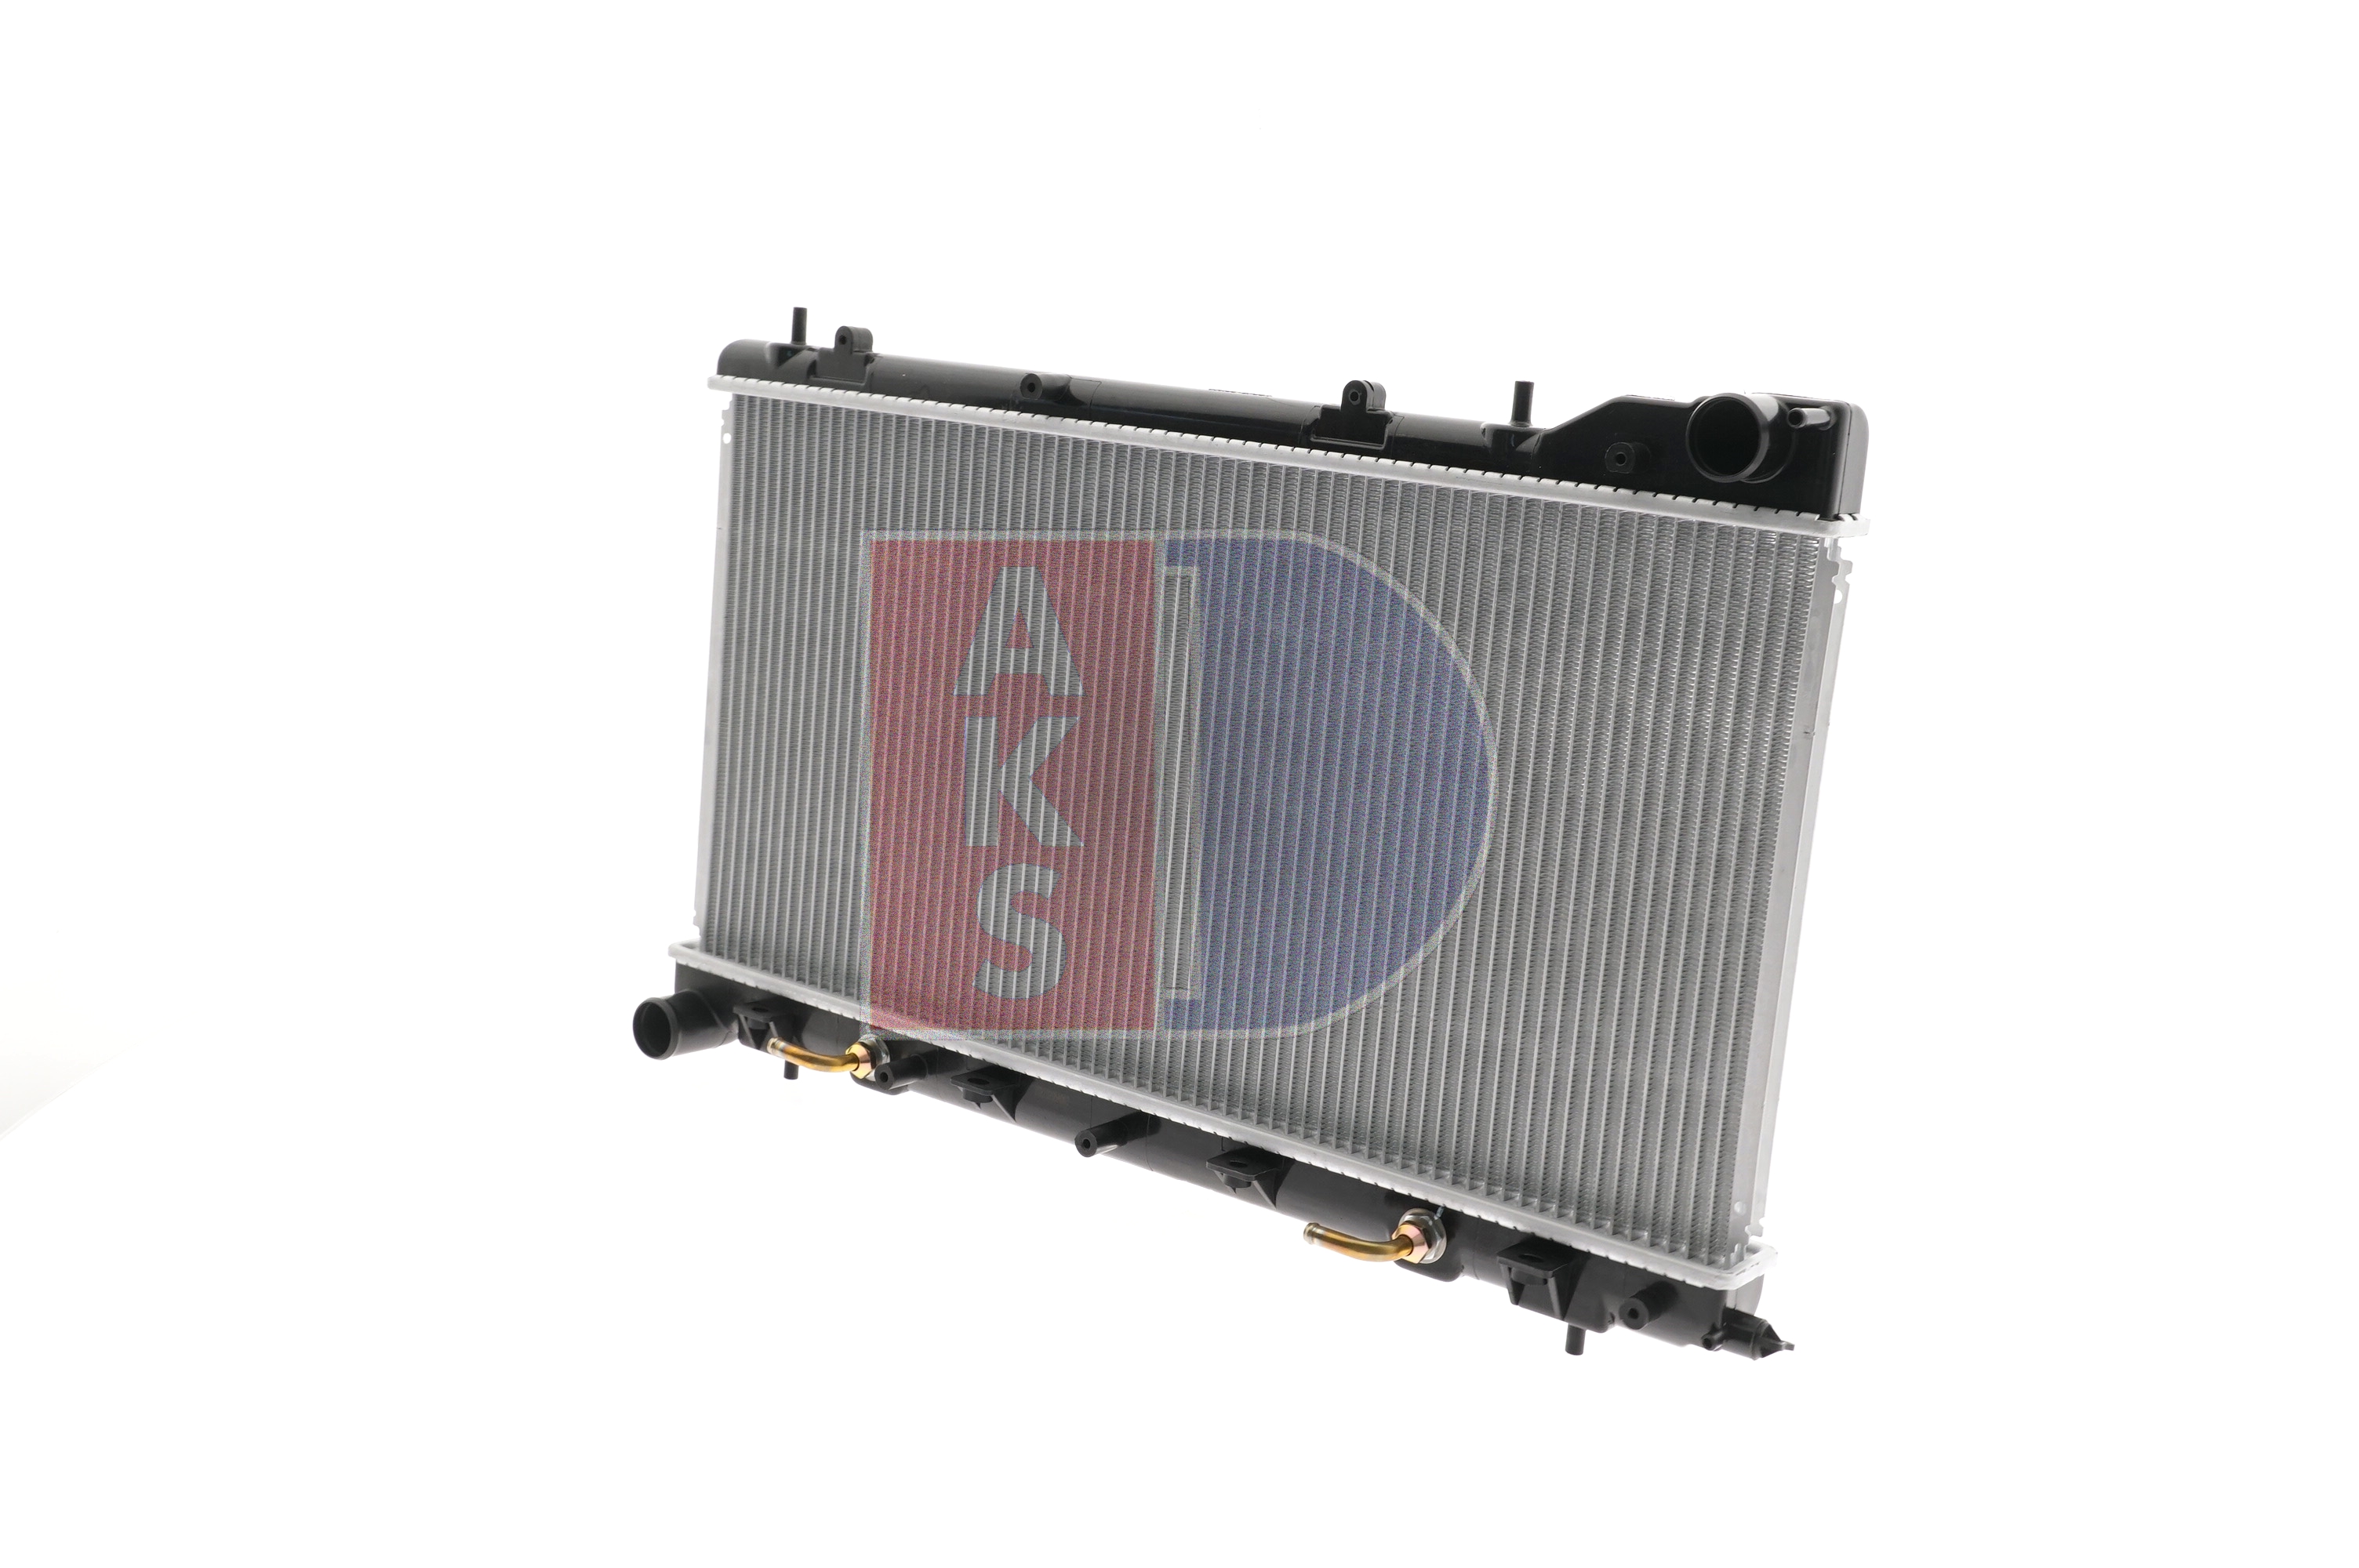 AKS DASIS 350018N Engine radiator Aluminium, for vehicles with/without air conditioning, 340 x 686 x 16 mm, Automatic Transmission, Brazed cooling fins